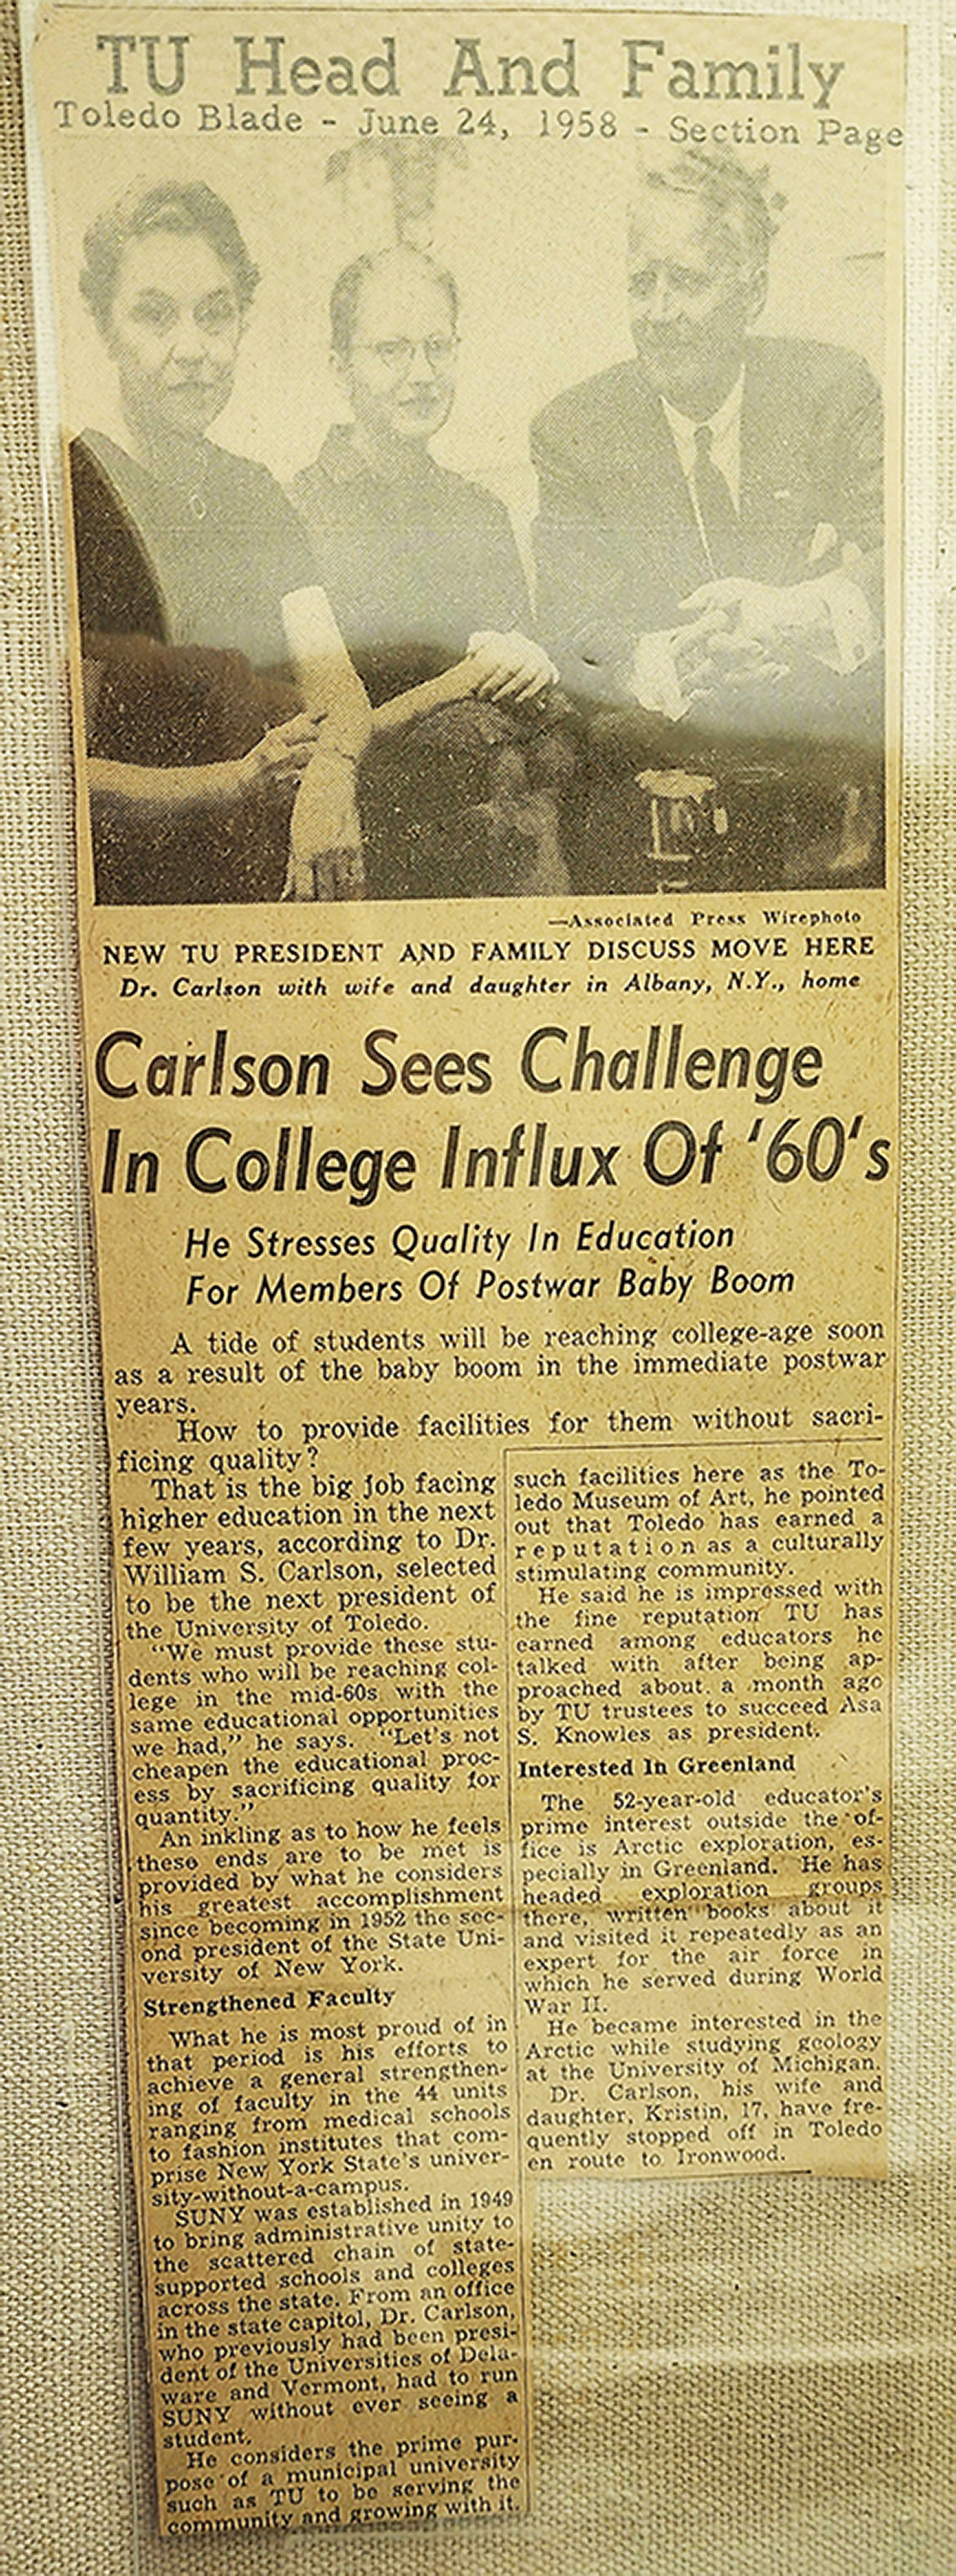 Toledo Blade Photo: TU Head and Family, Article: Carlson Sees Challenge in 1960's College Influx, June 24, 1958